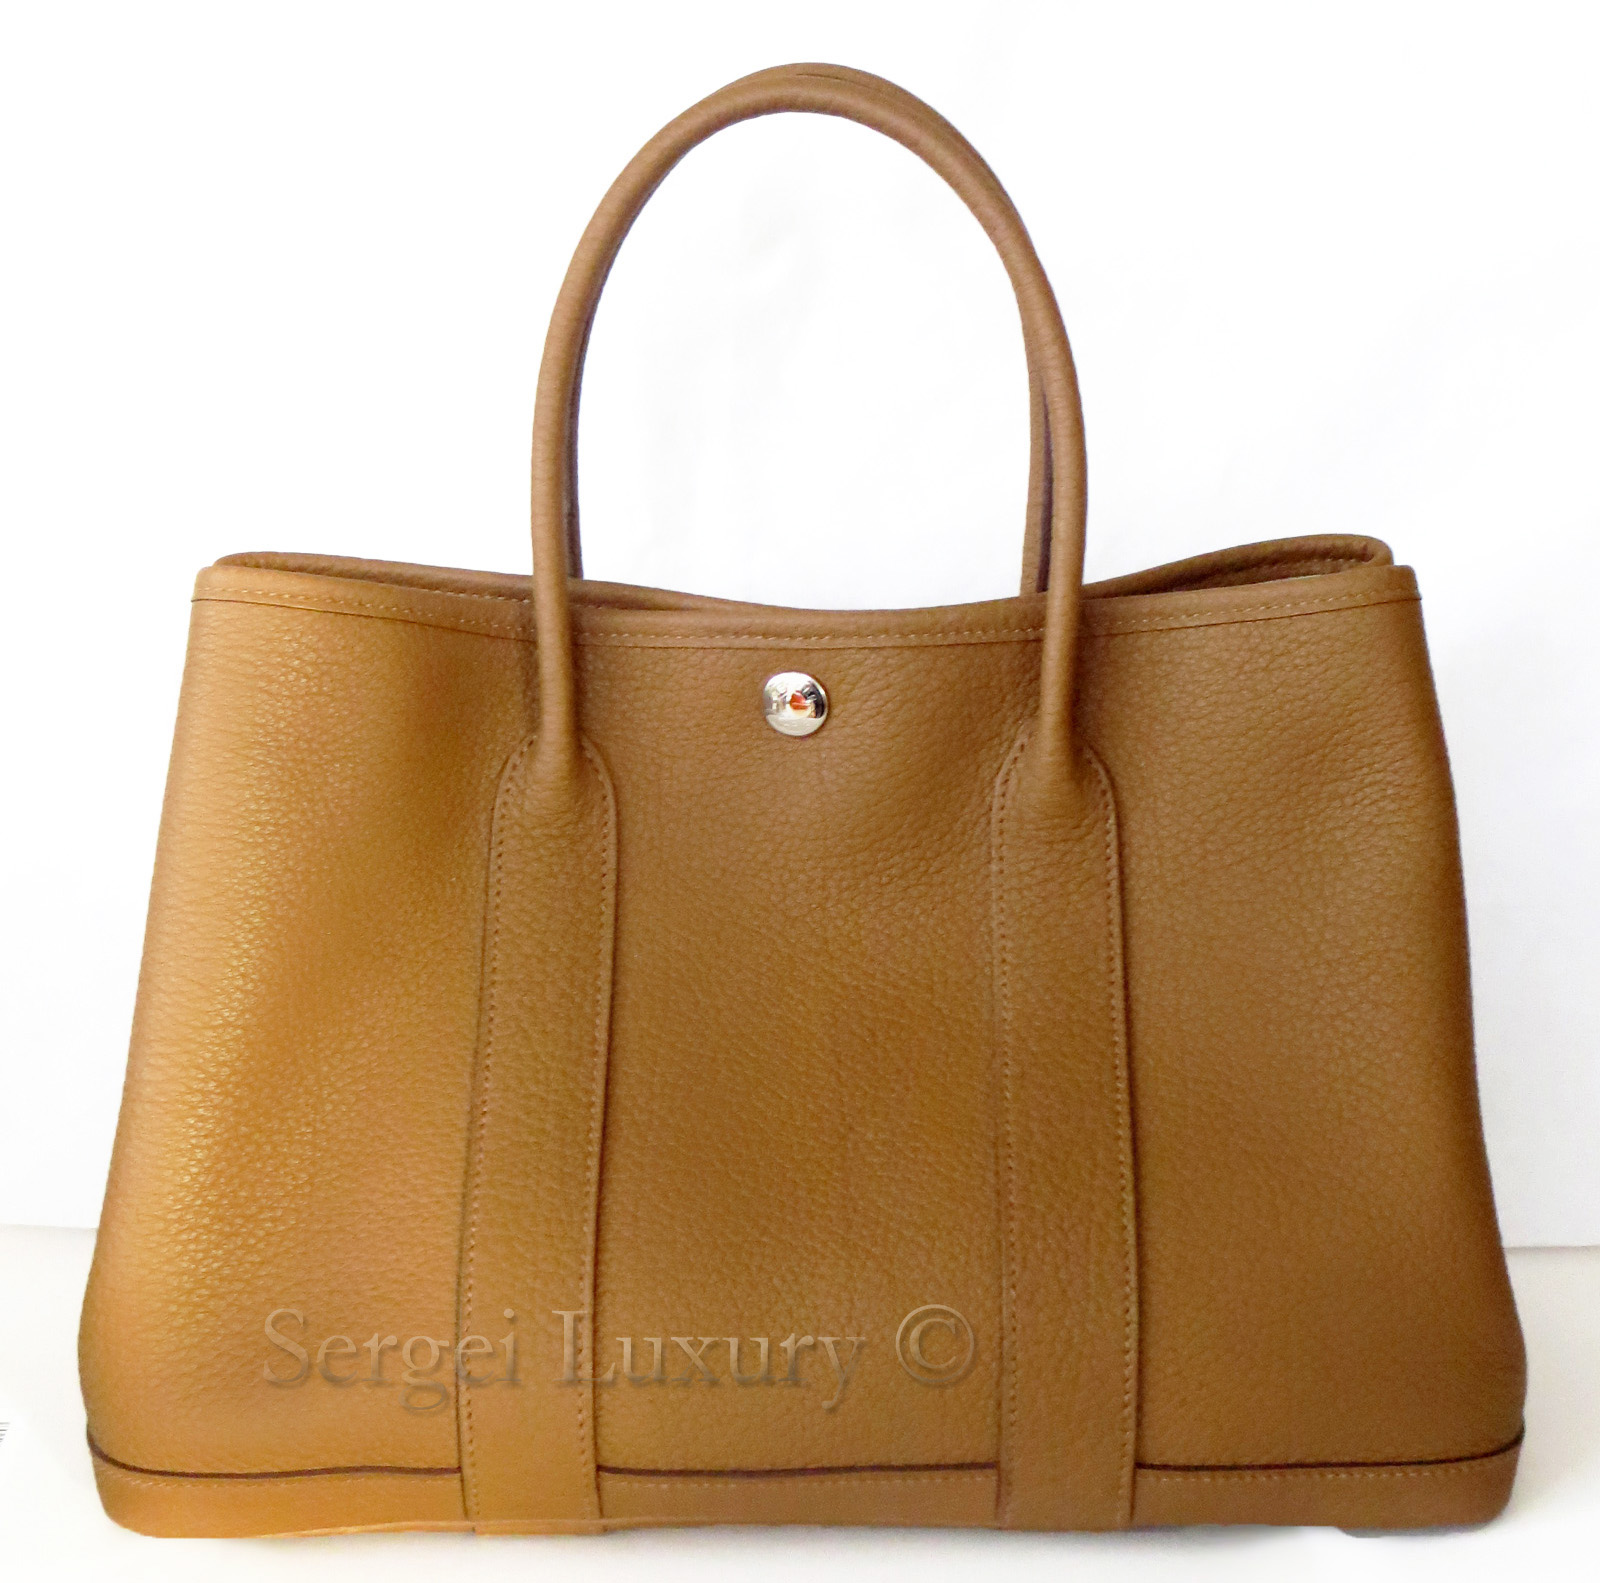 NEW Authentic Hermes Garden Party Tote 